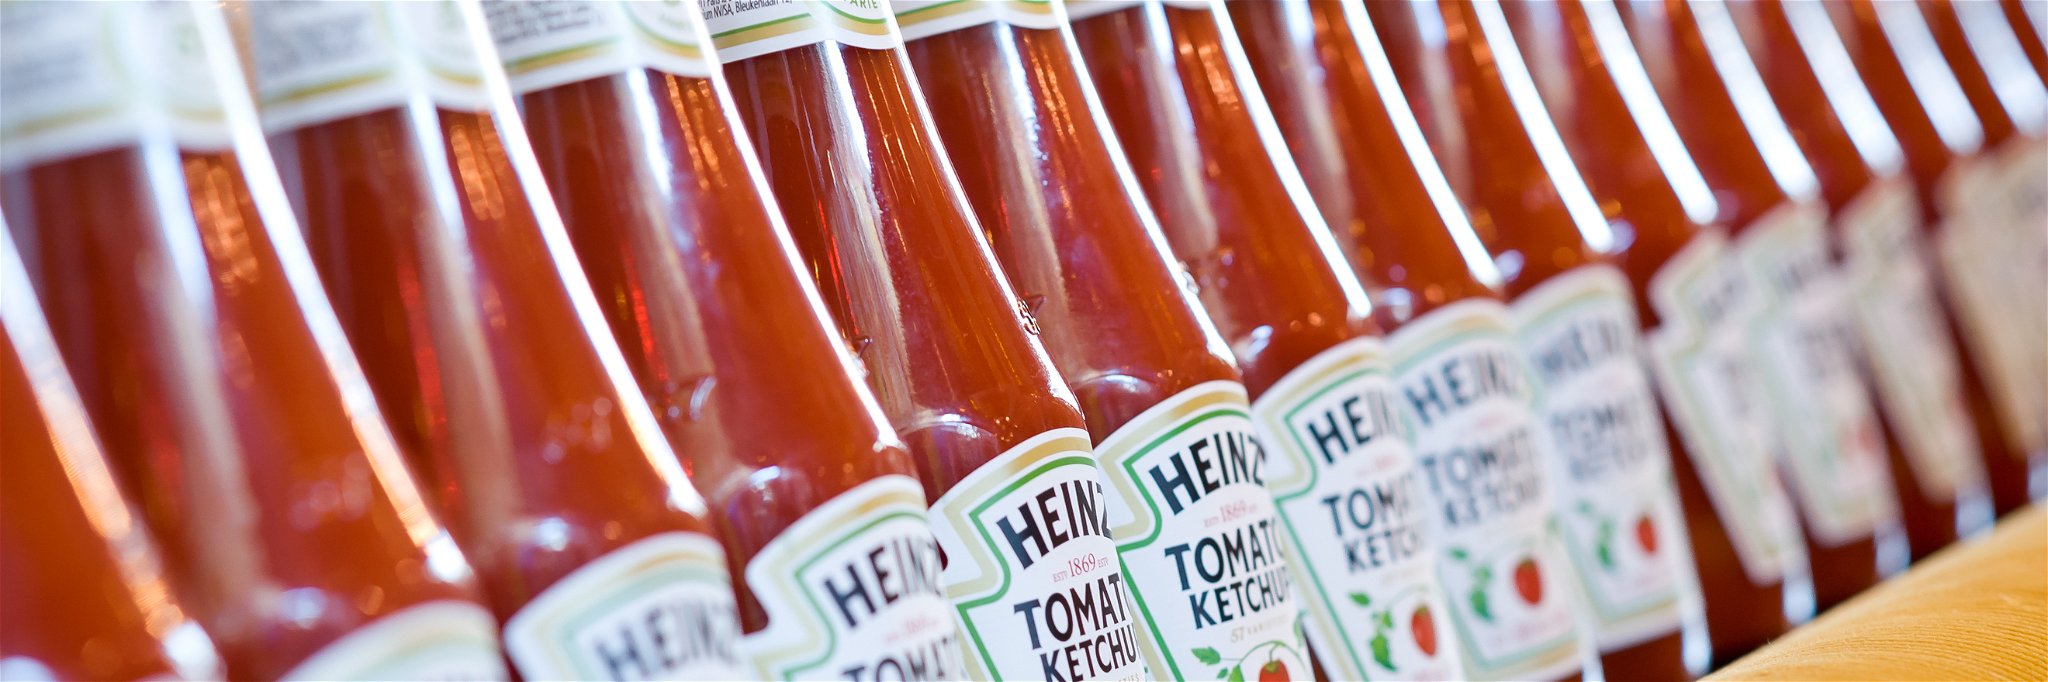 Kraft Heinz, the maker of&nbsp;the iconic Heinz ketchup, says people have to get used to higher prices.